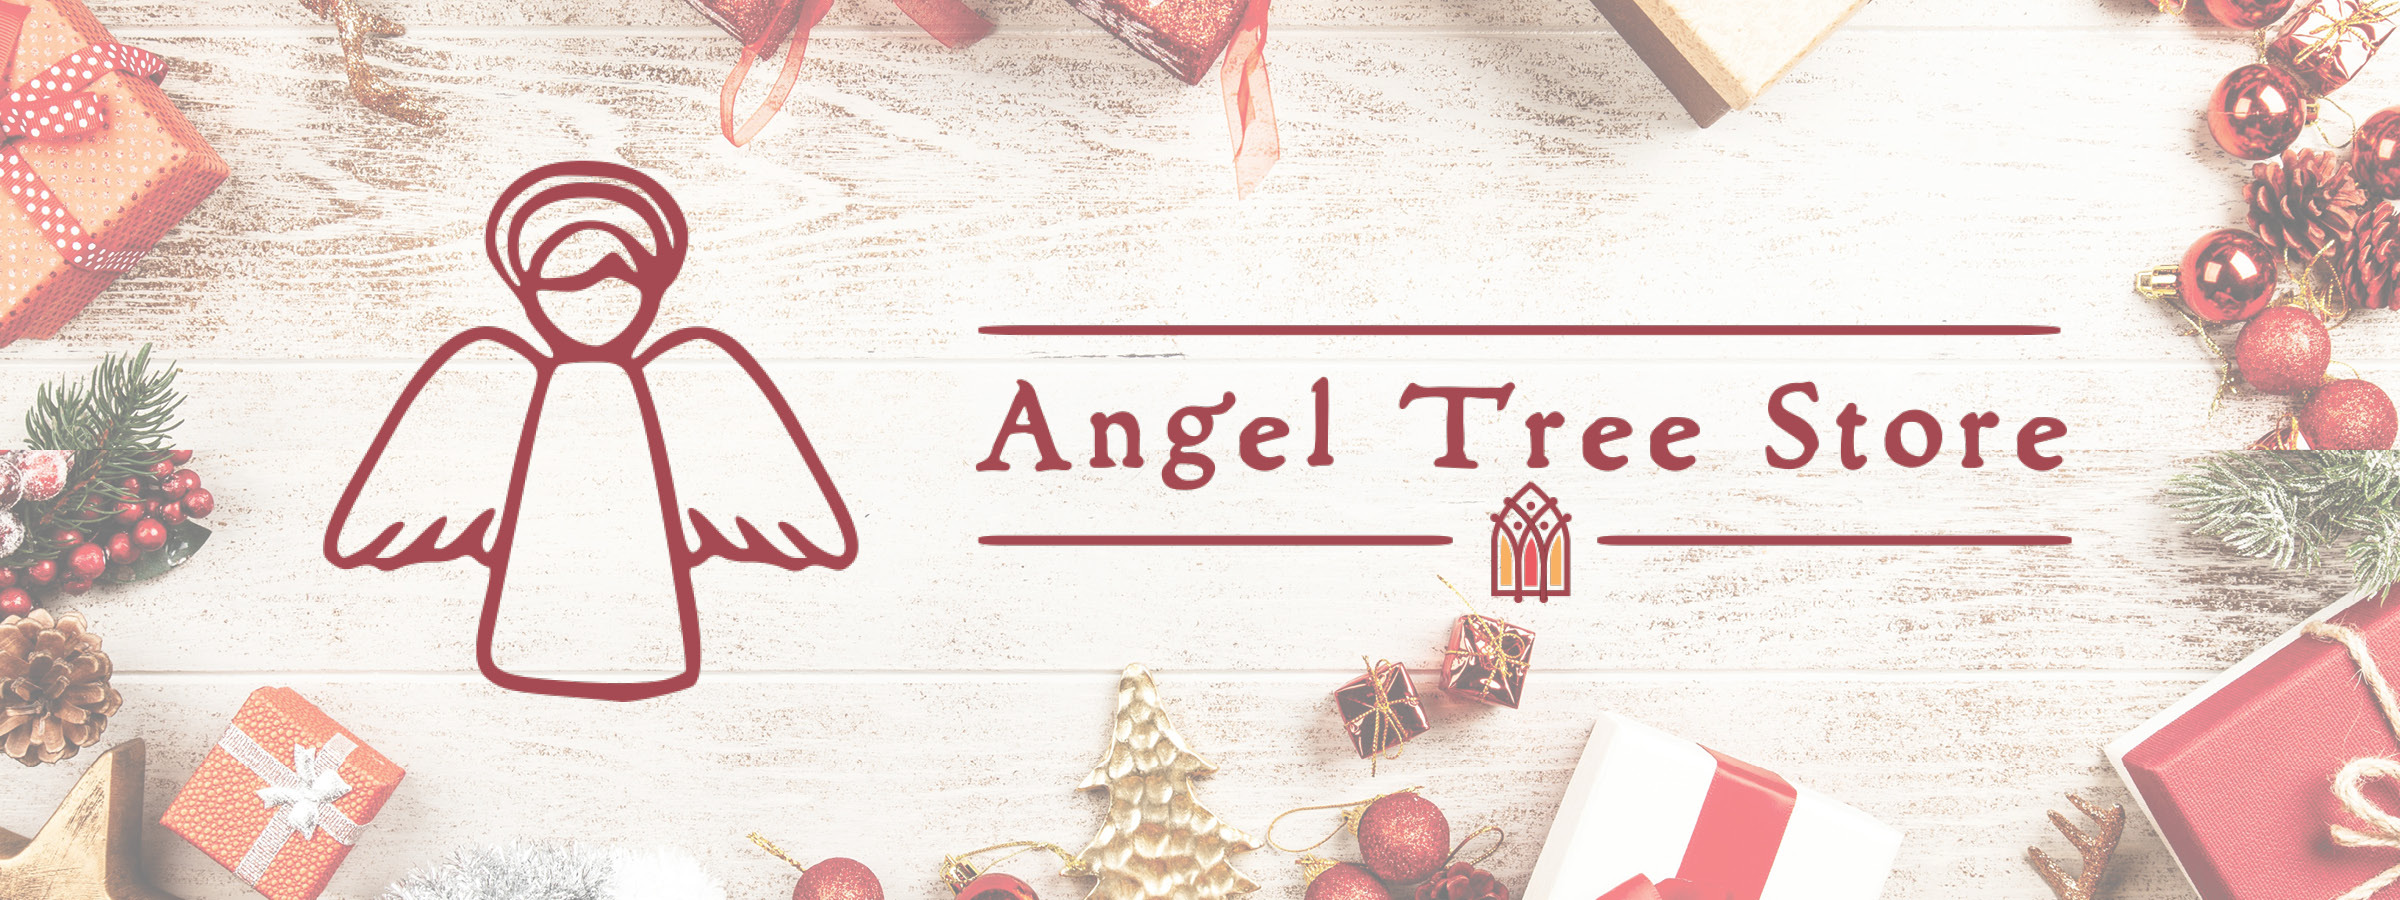 Introducing the Christ Church Angel Tree Store